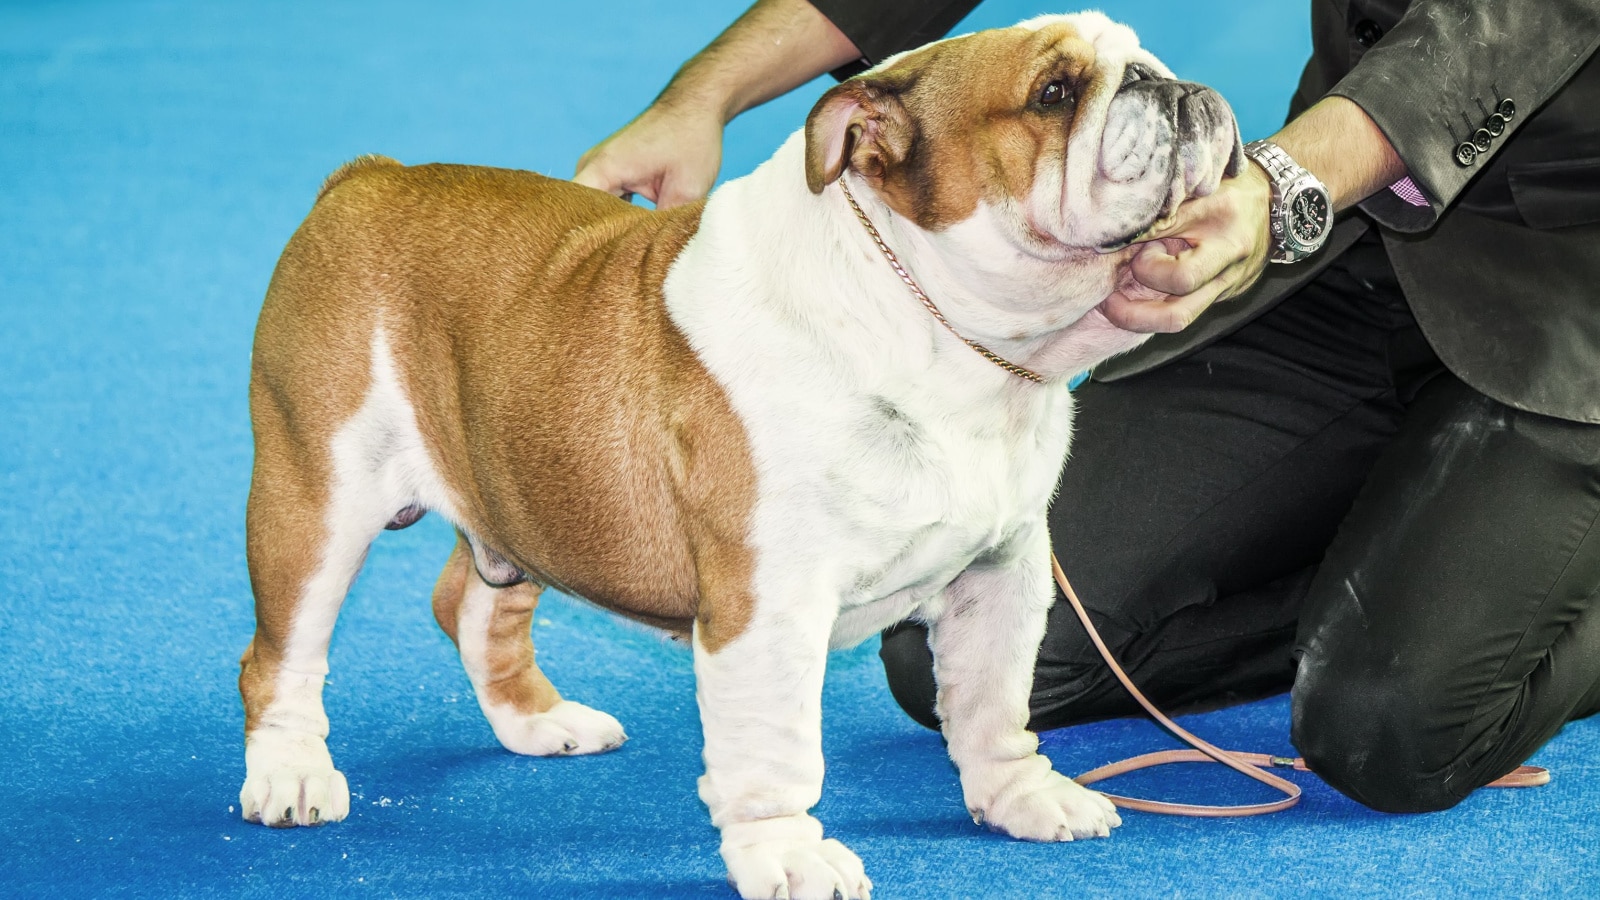 Stacking show - english bulldog show puppy being stacked on a blue carpet